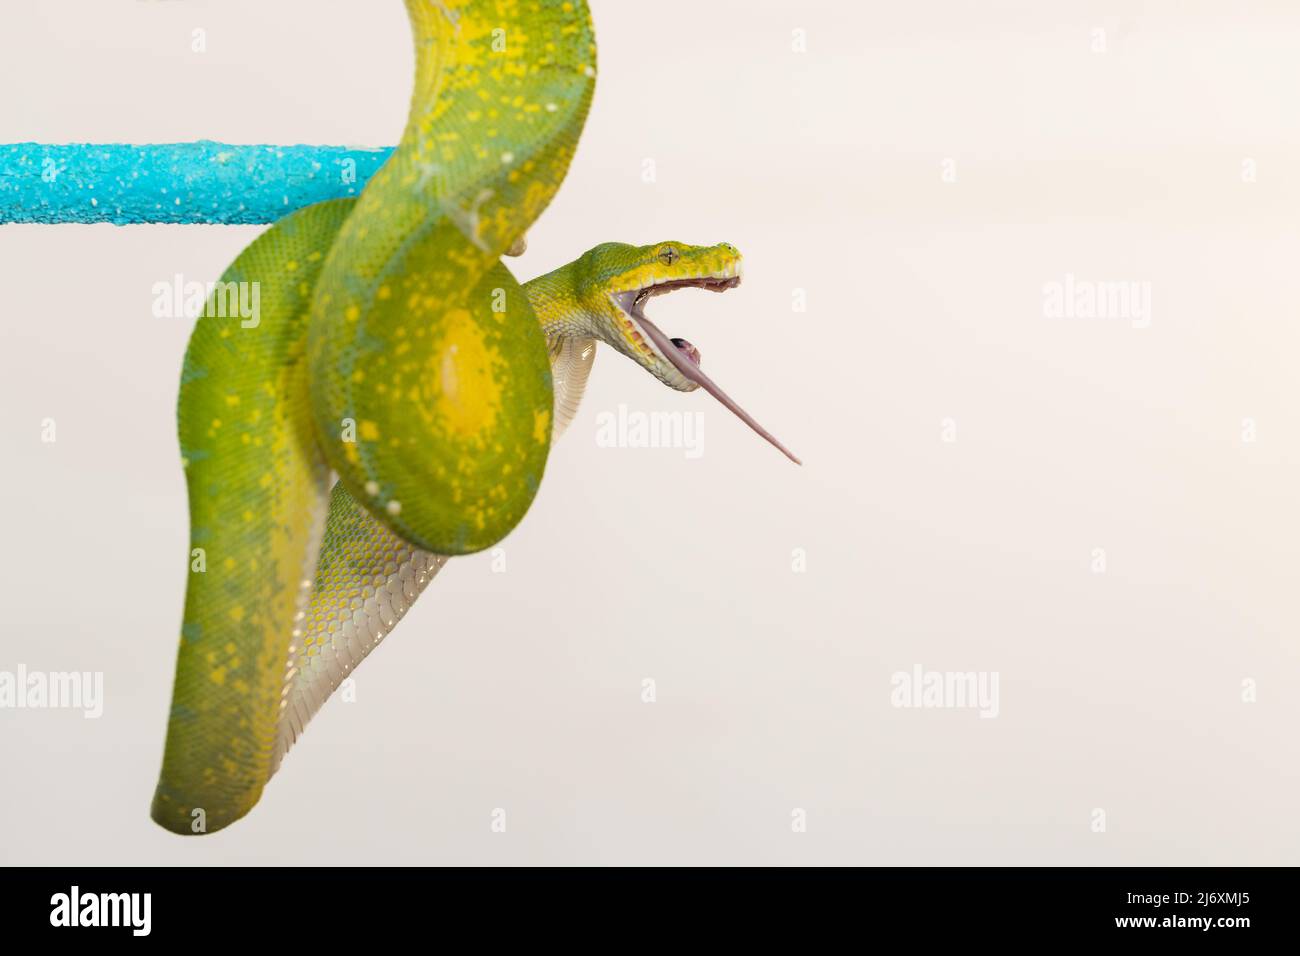 Corallus caninus - green snake coiled into a ball. Stock Photo